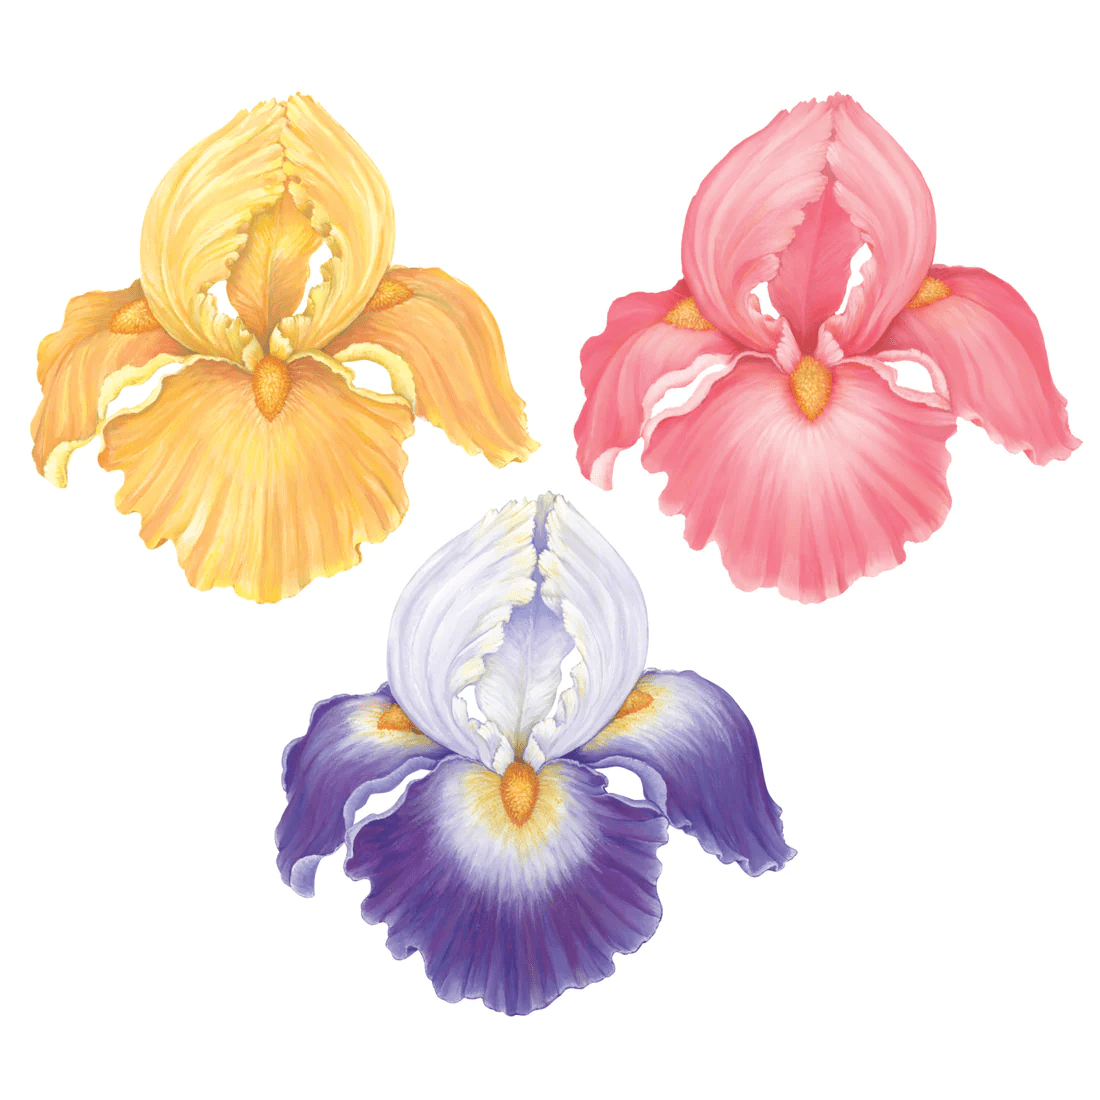 Die Cut Irises Placemat – 12 Sheets | Hester & Cook | Iris Gifts & Décor